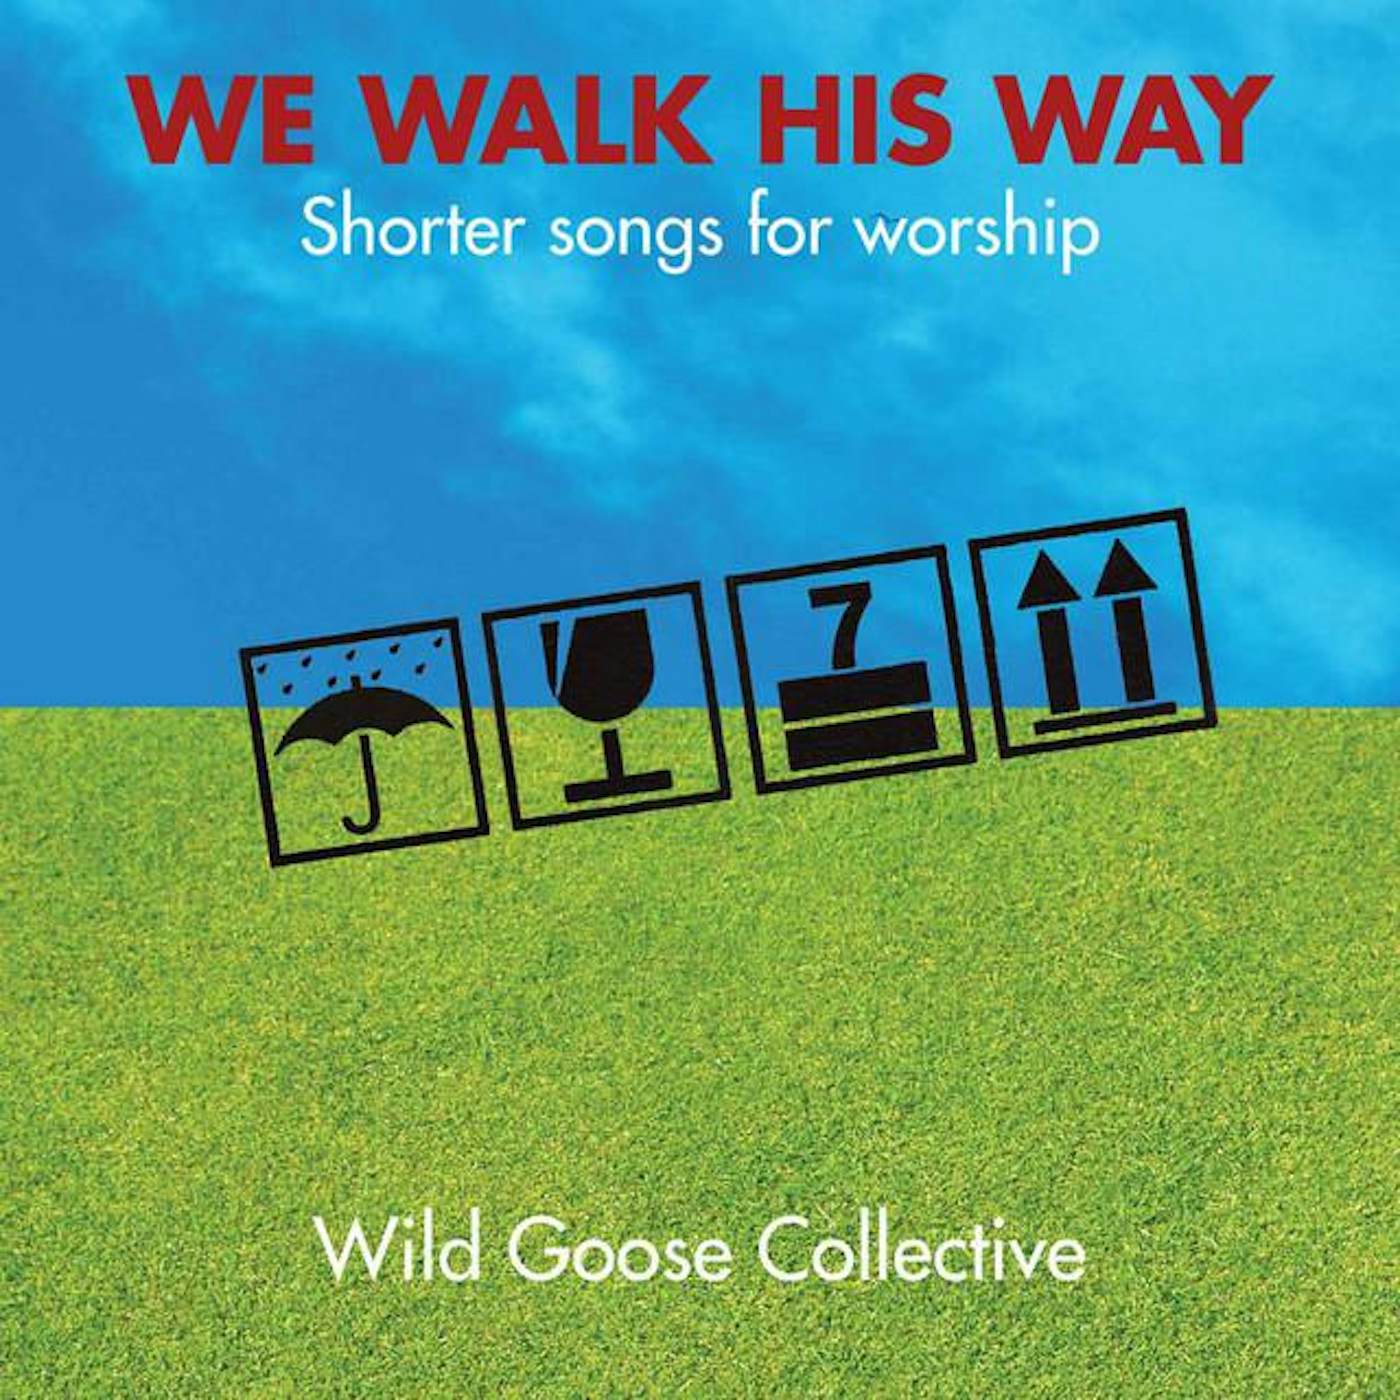 The Wild Goose Collective